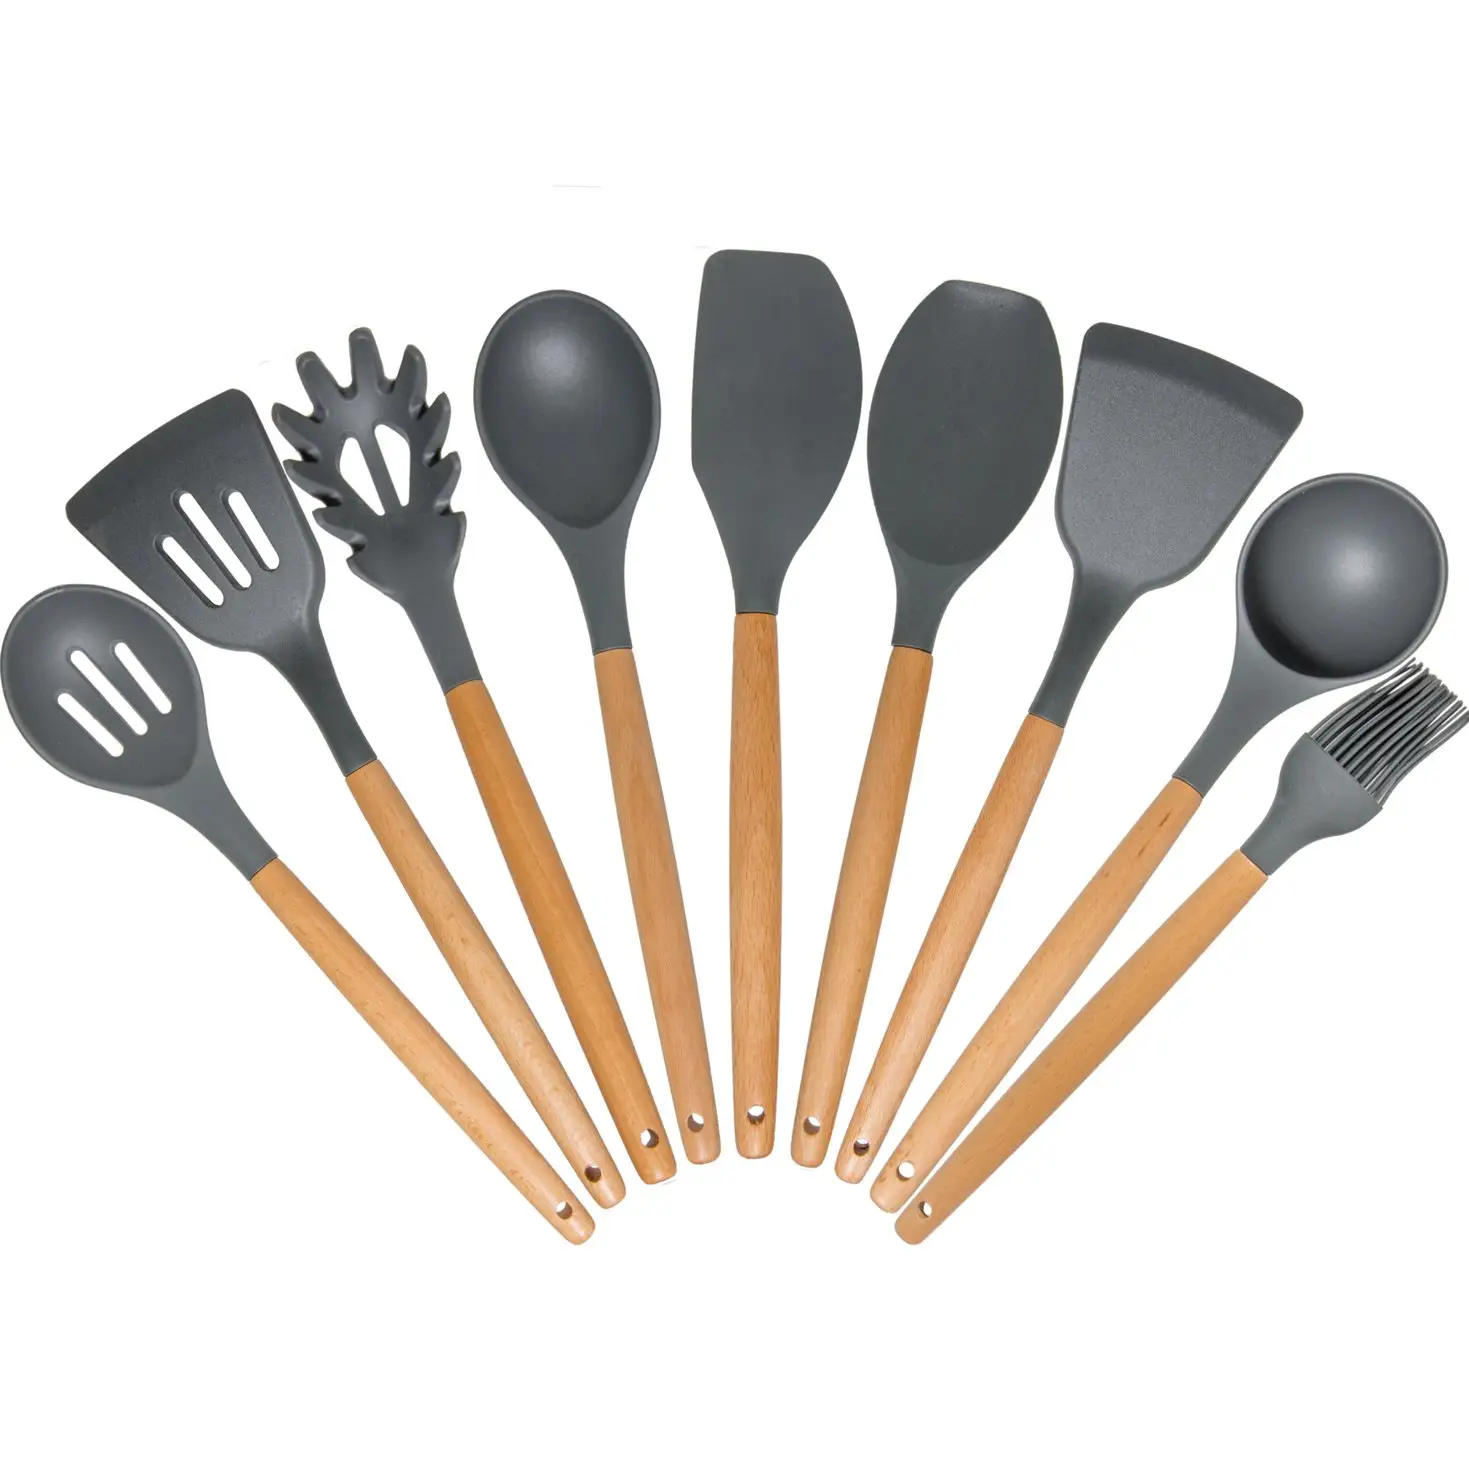 9 Pieces Gourmet Natural Wooden Handles Silicone Kitchen Cooking Tool Set